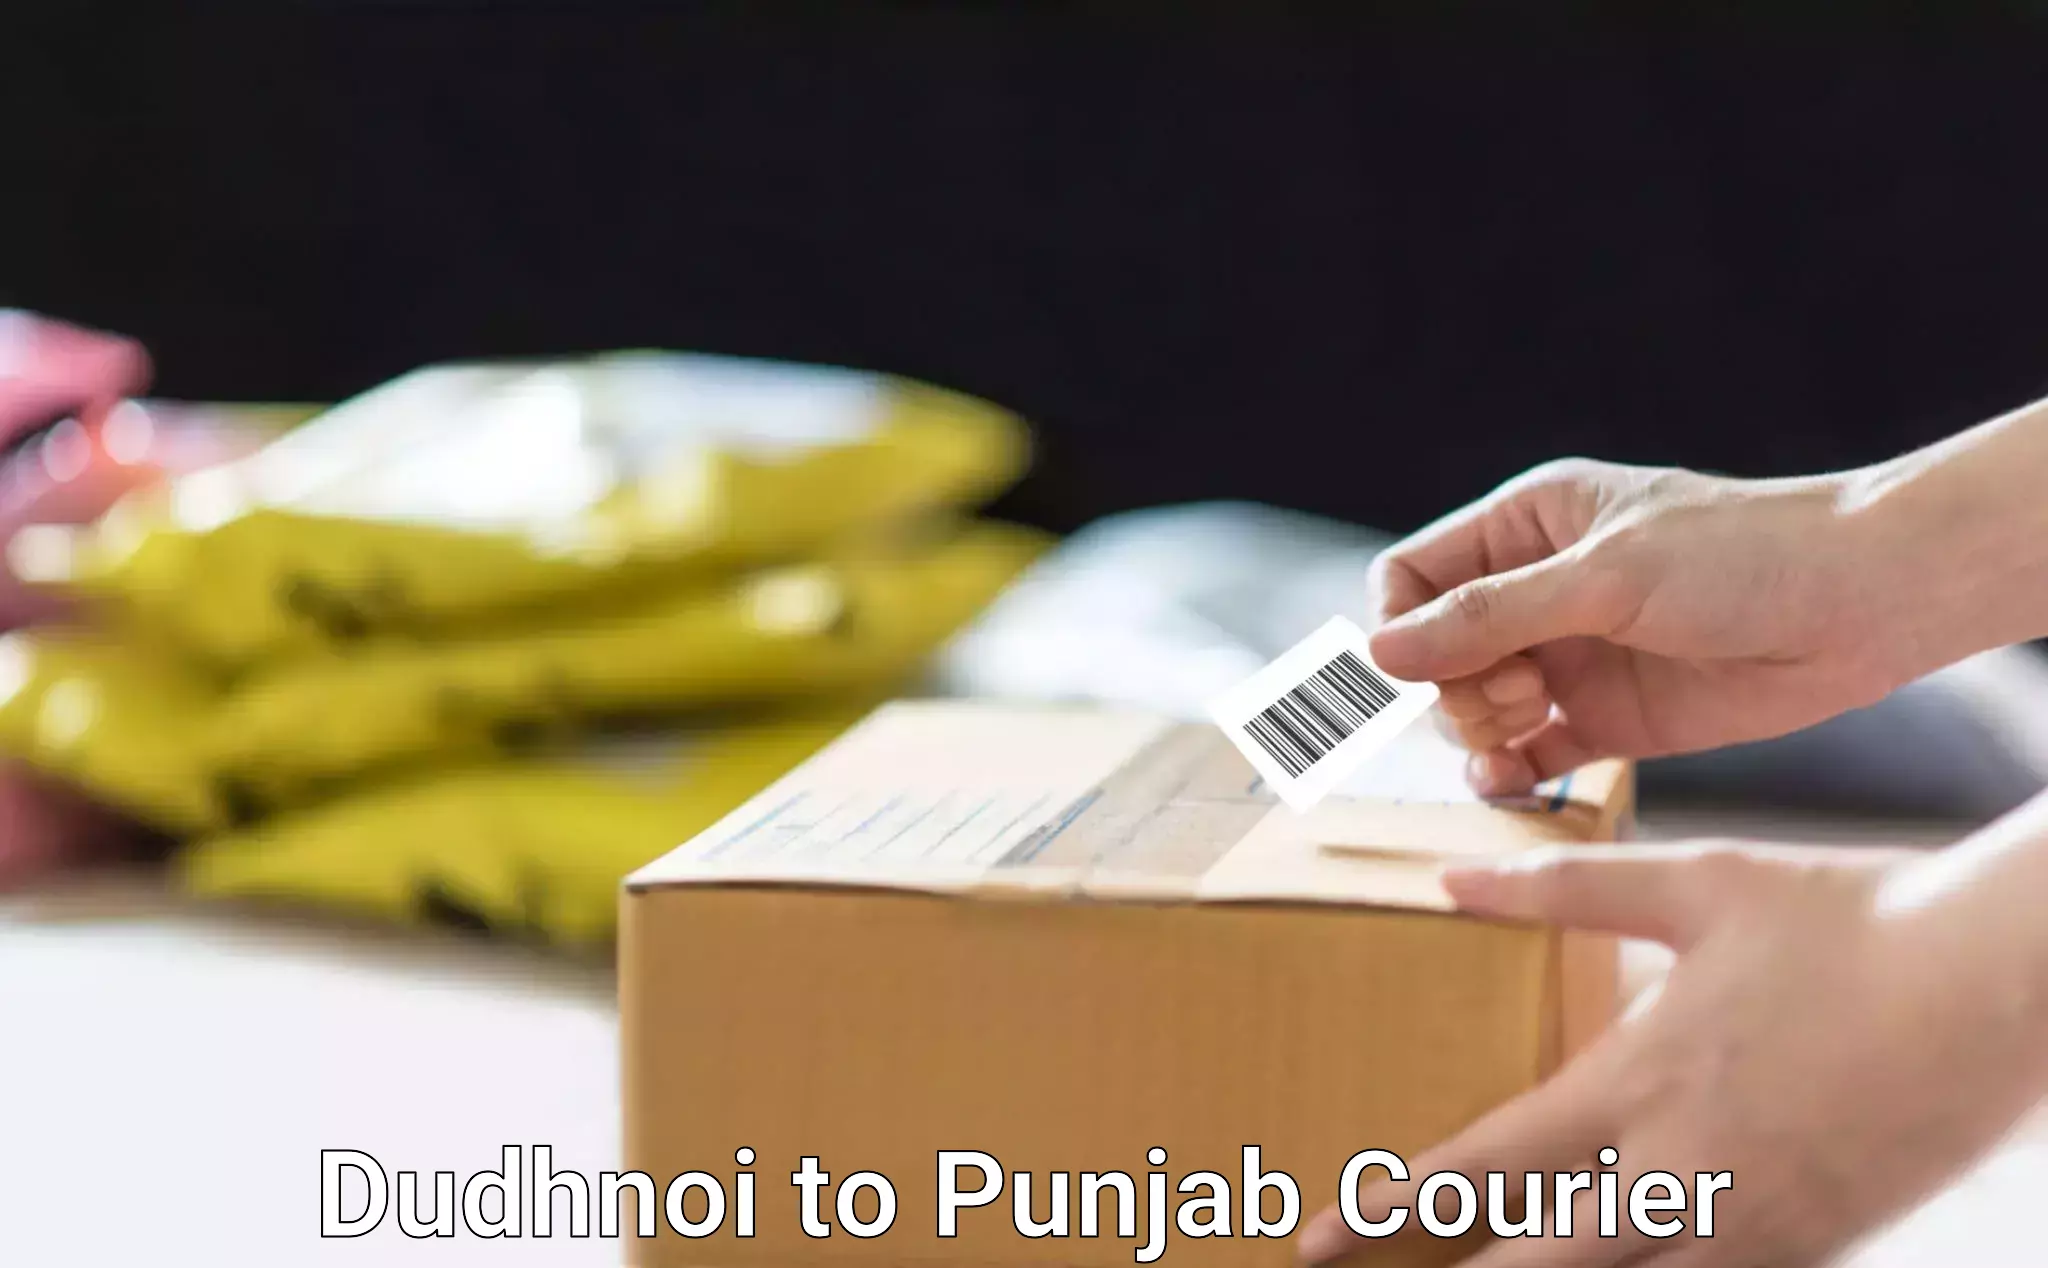 Customizable delivery plans Dudhnoi to Punjab